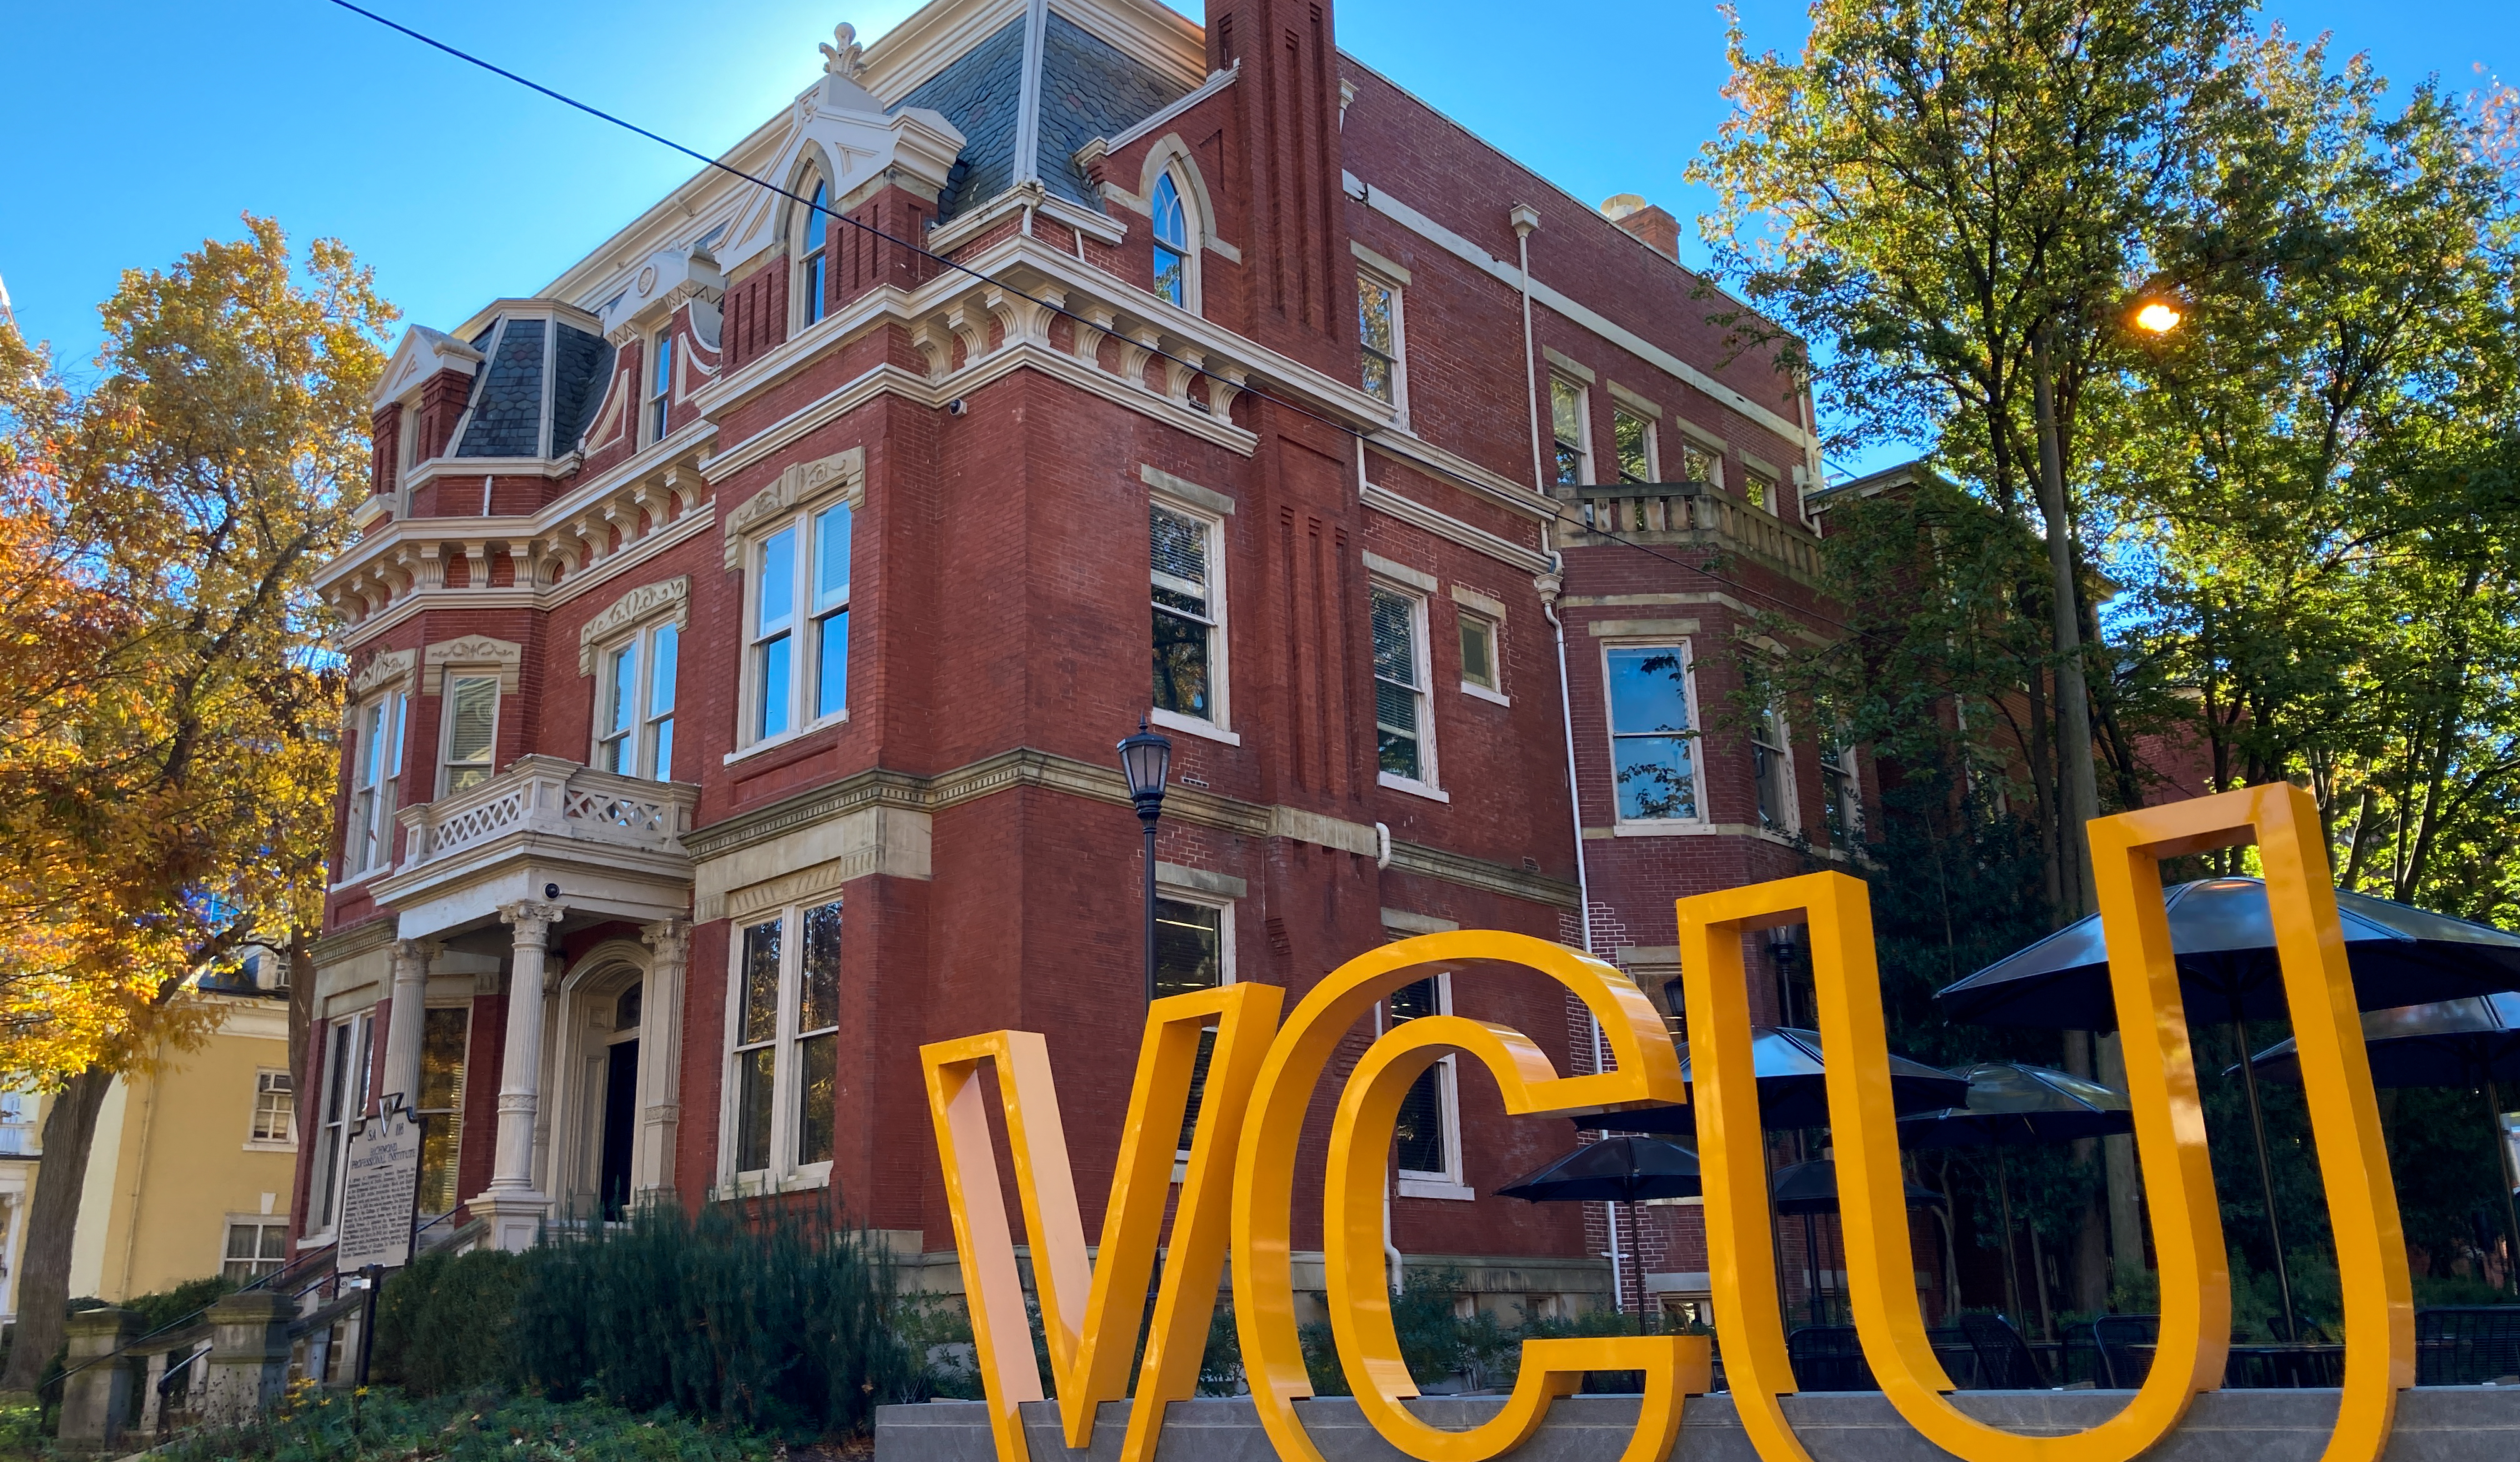 Founders Hall exterior with VCU sign